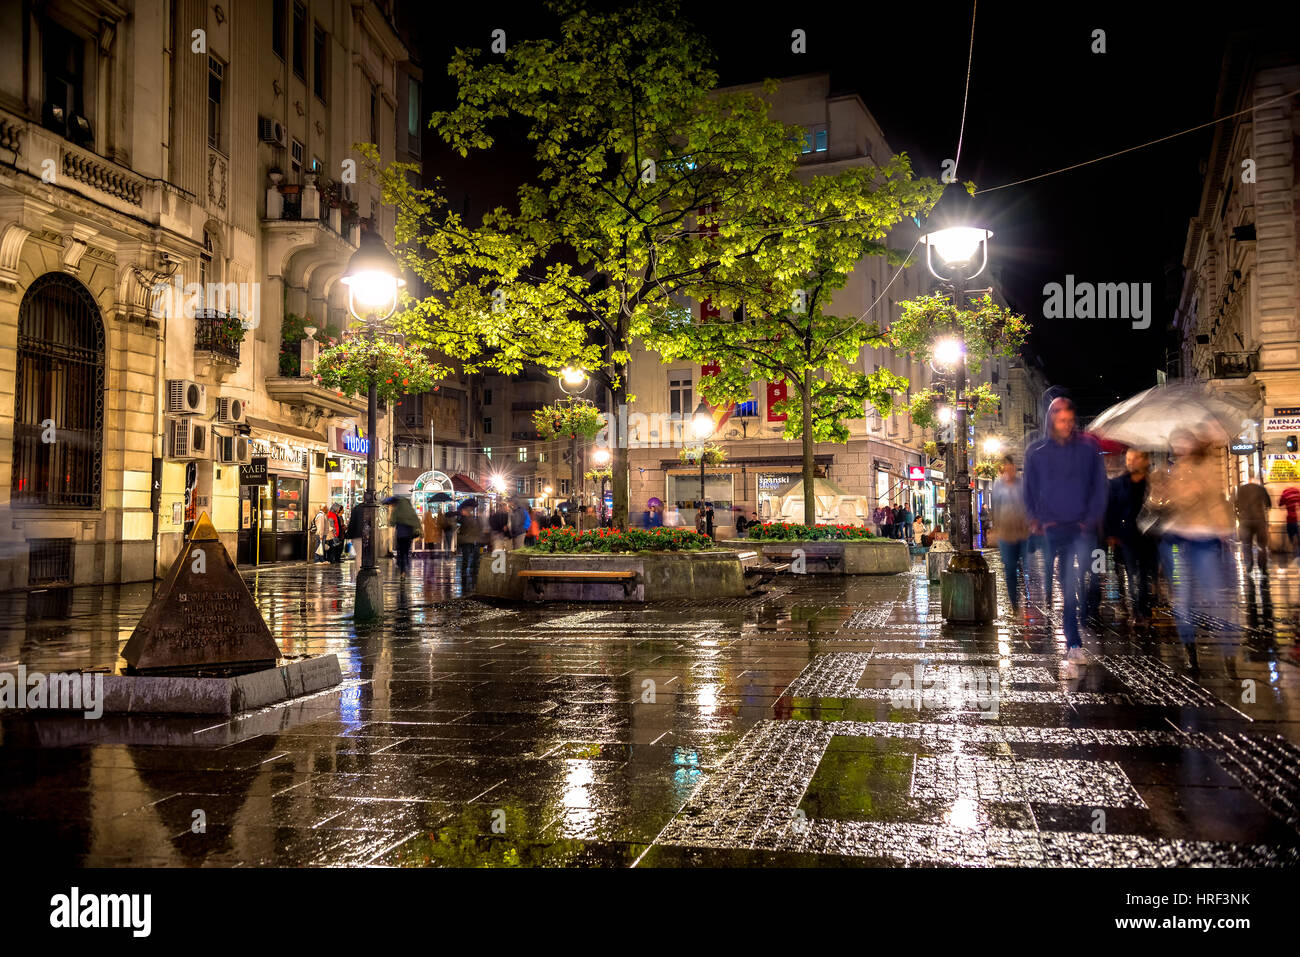 BELGRADE, SERBIA - SEPTEMBER 25: Rainy inght at Knez Mihailova Street on September 25, 2015 in Belgrade, Serbia. Street is the main shopping mile of B Stock Photo